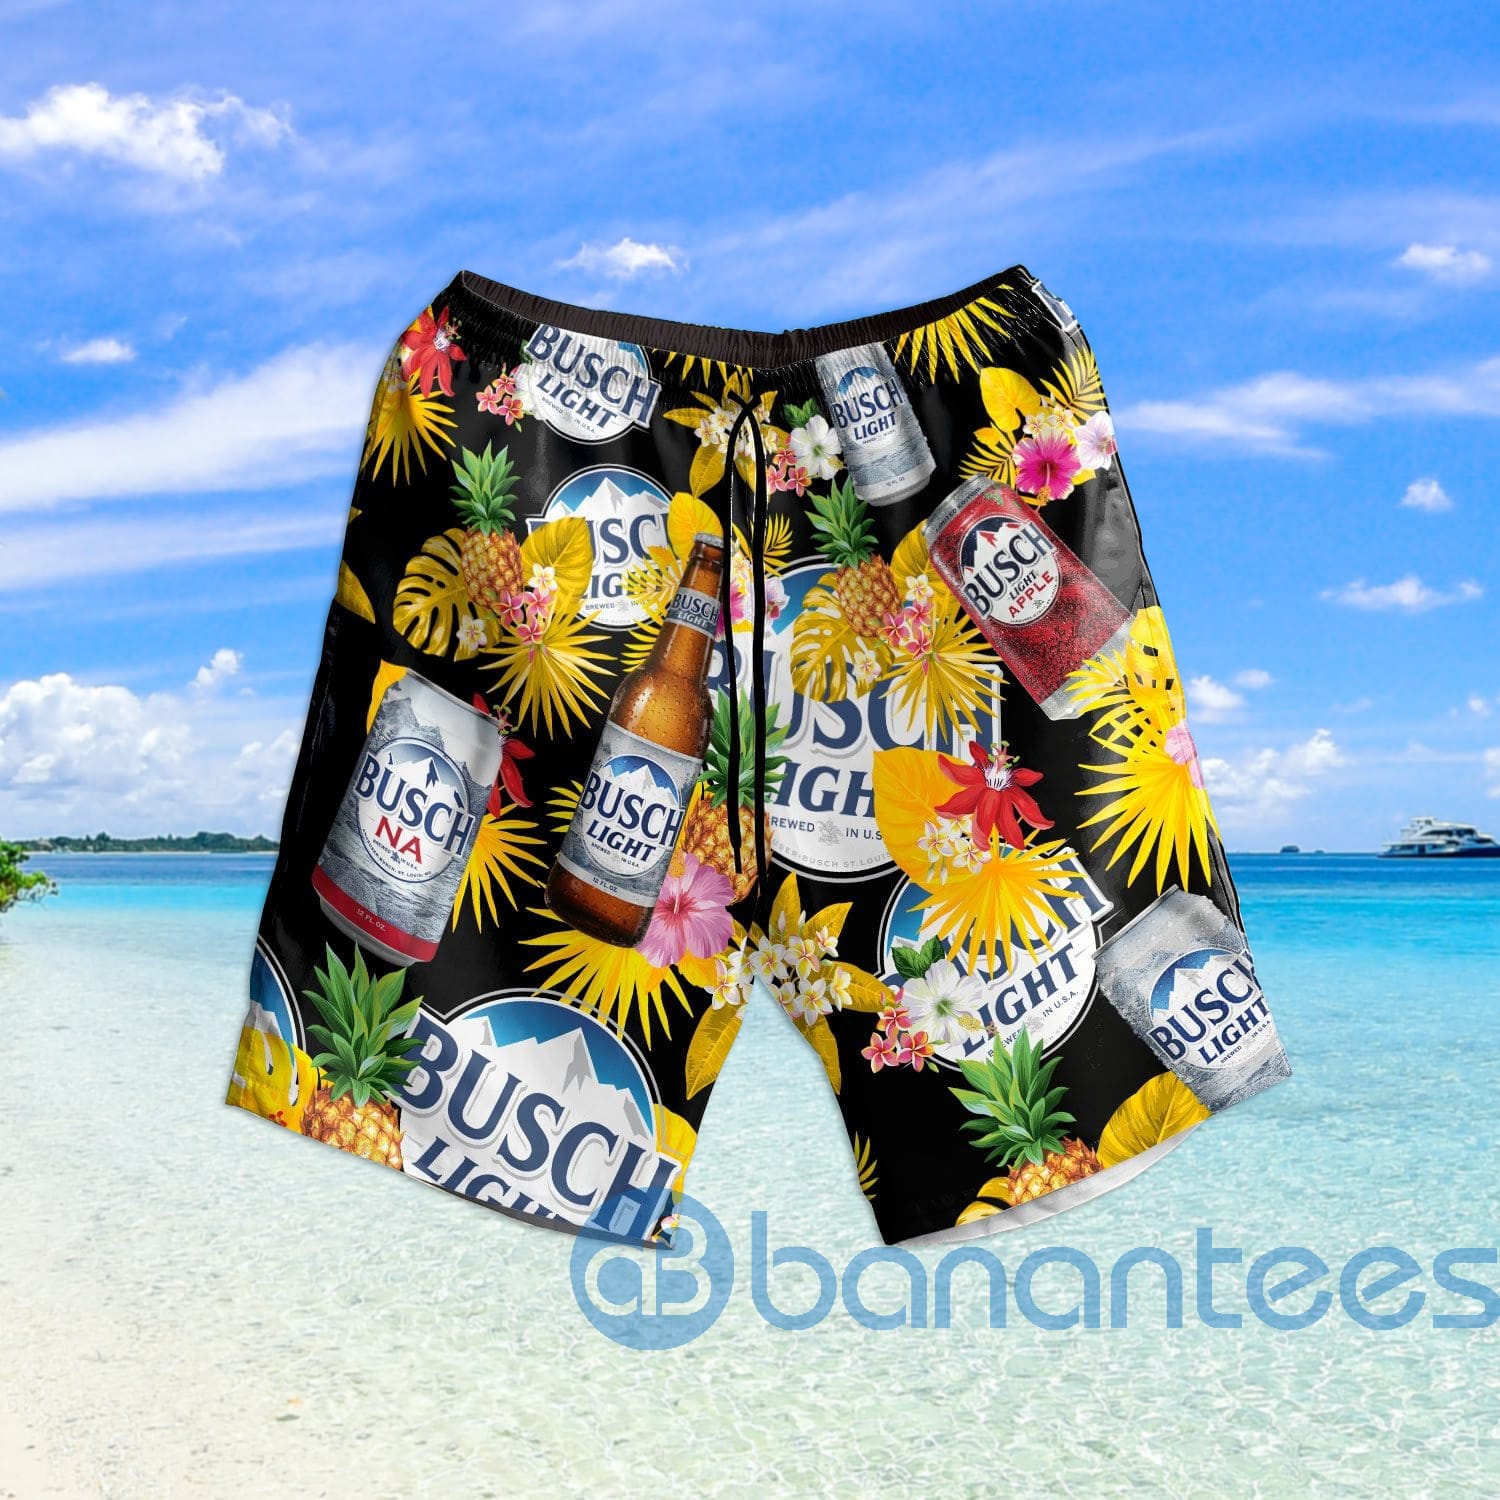 Busch Light Tropical Canned And Bottled Beer Beach Shorts Beer Lovers Father Day Gift